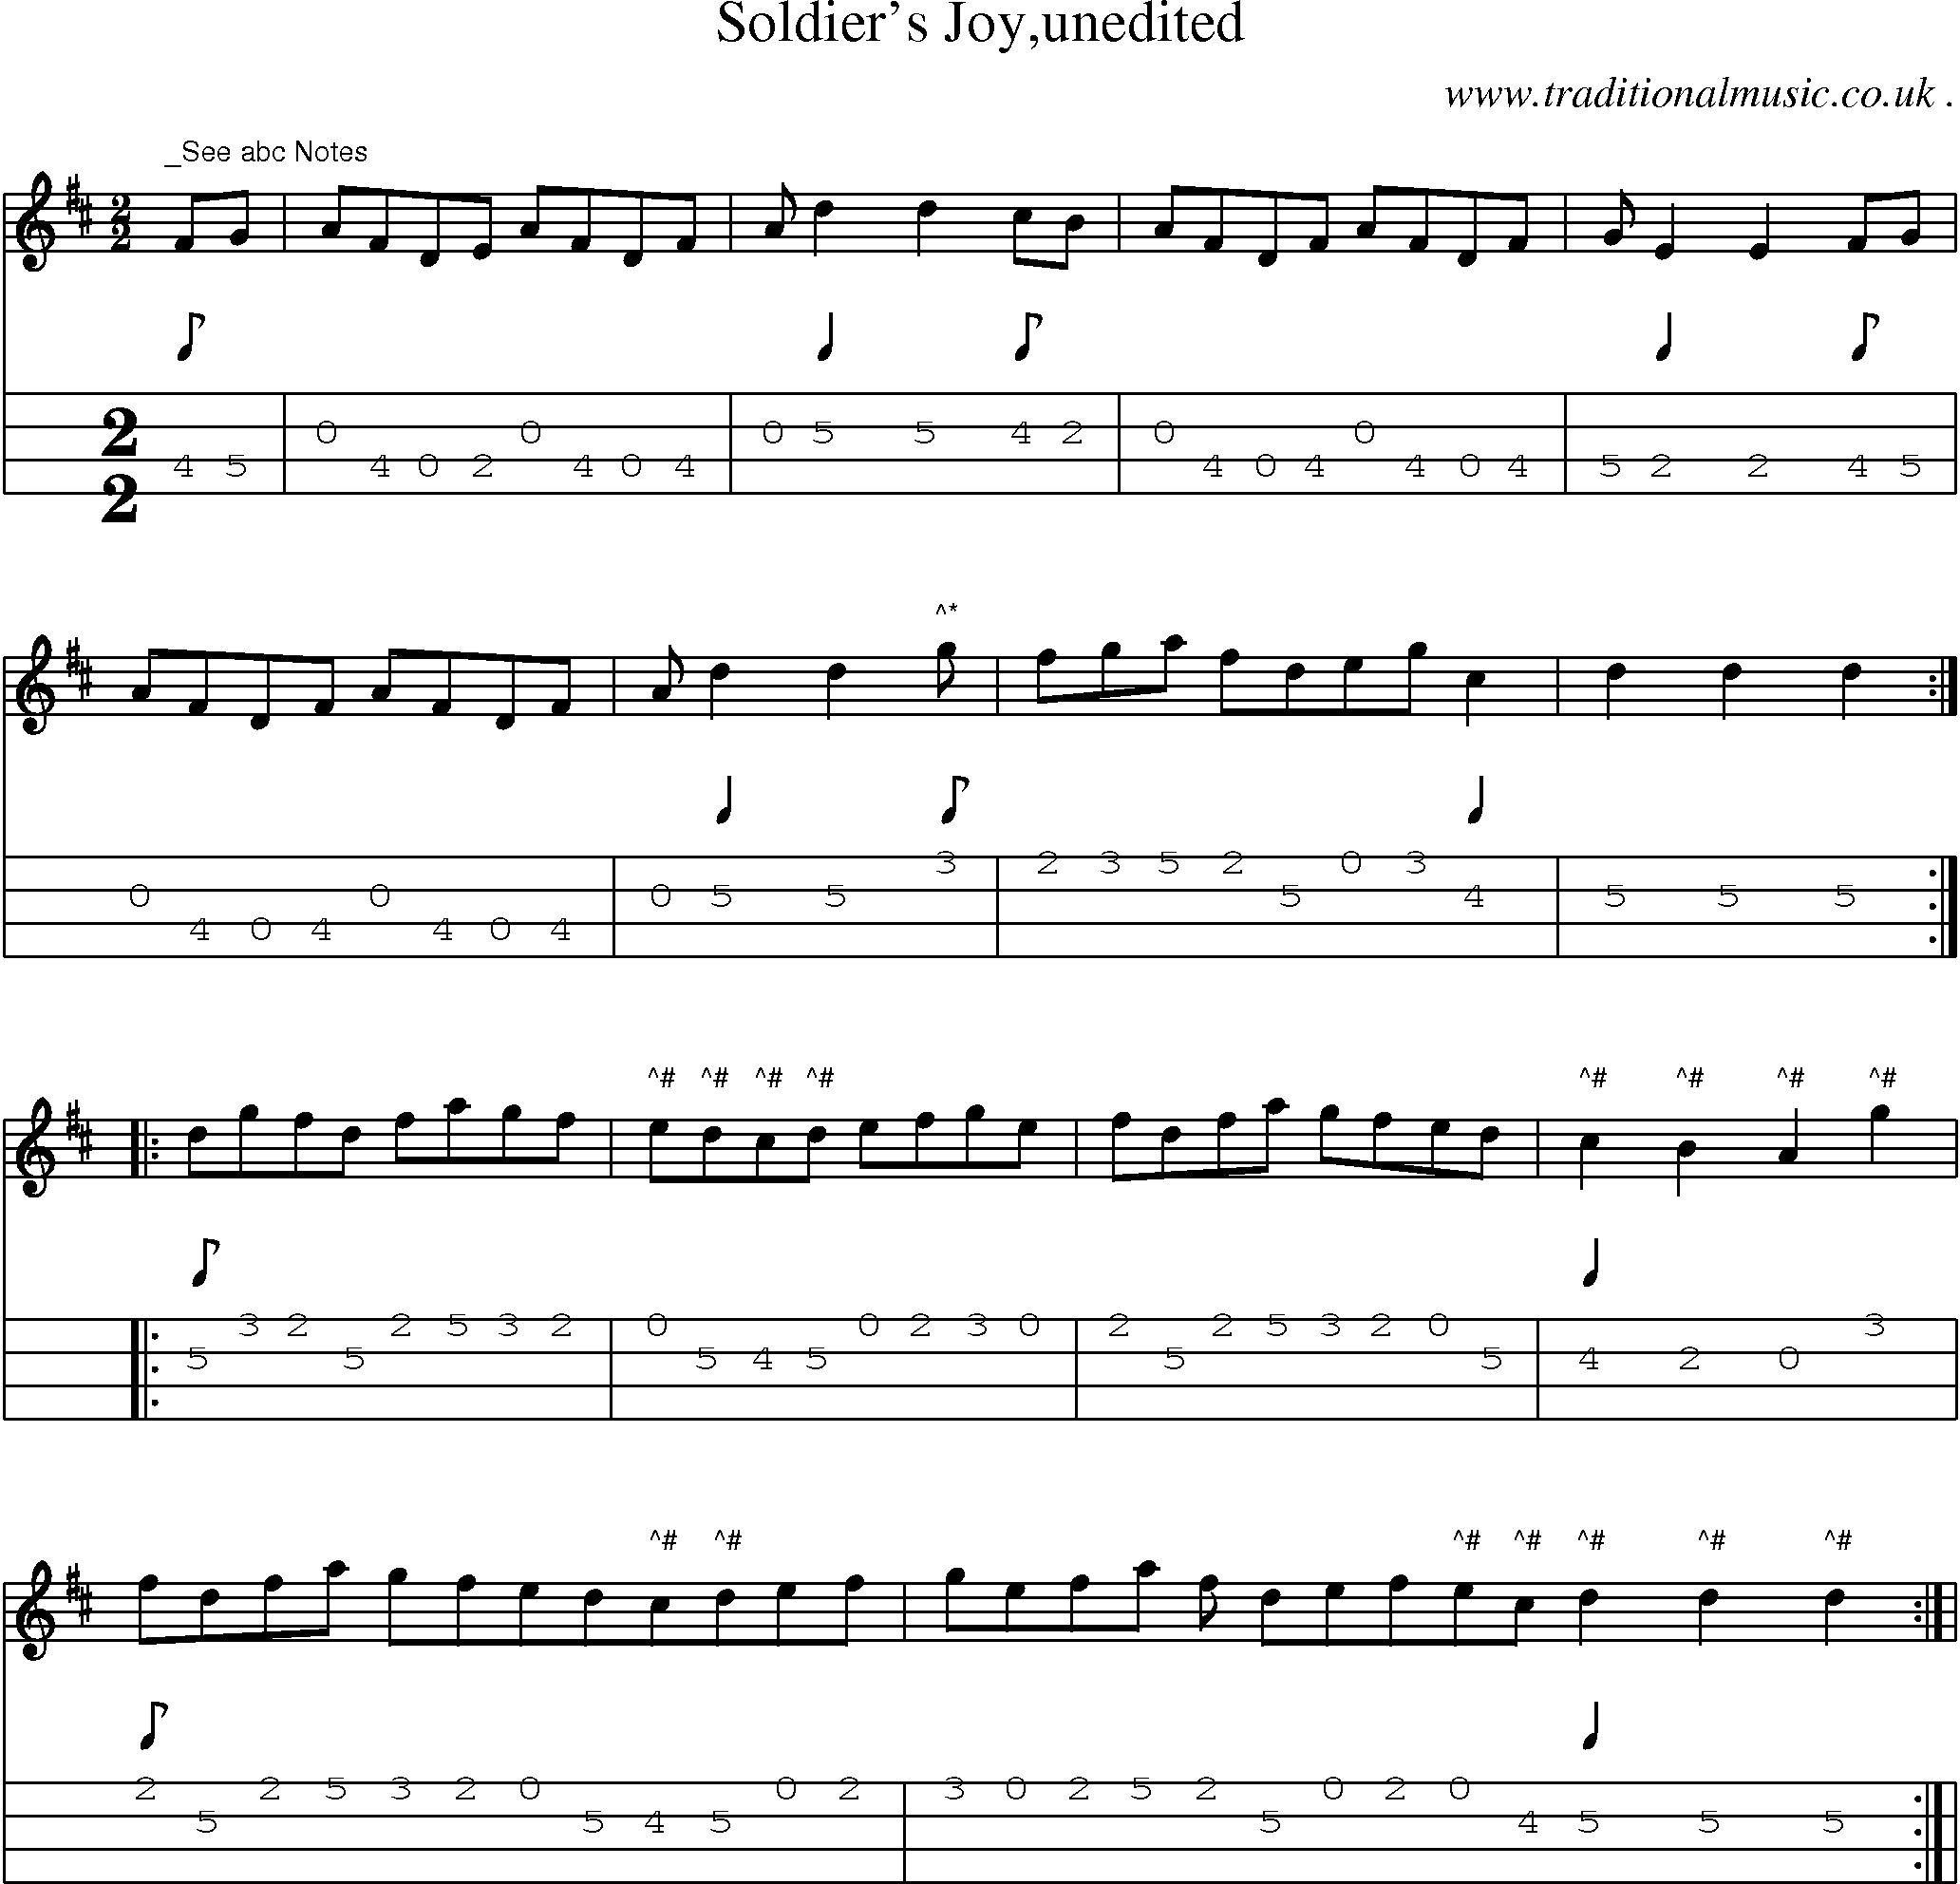 Sheet-Music and Mandolin Tabs for Soldiers Joyunedited